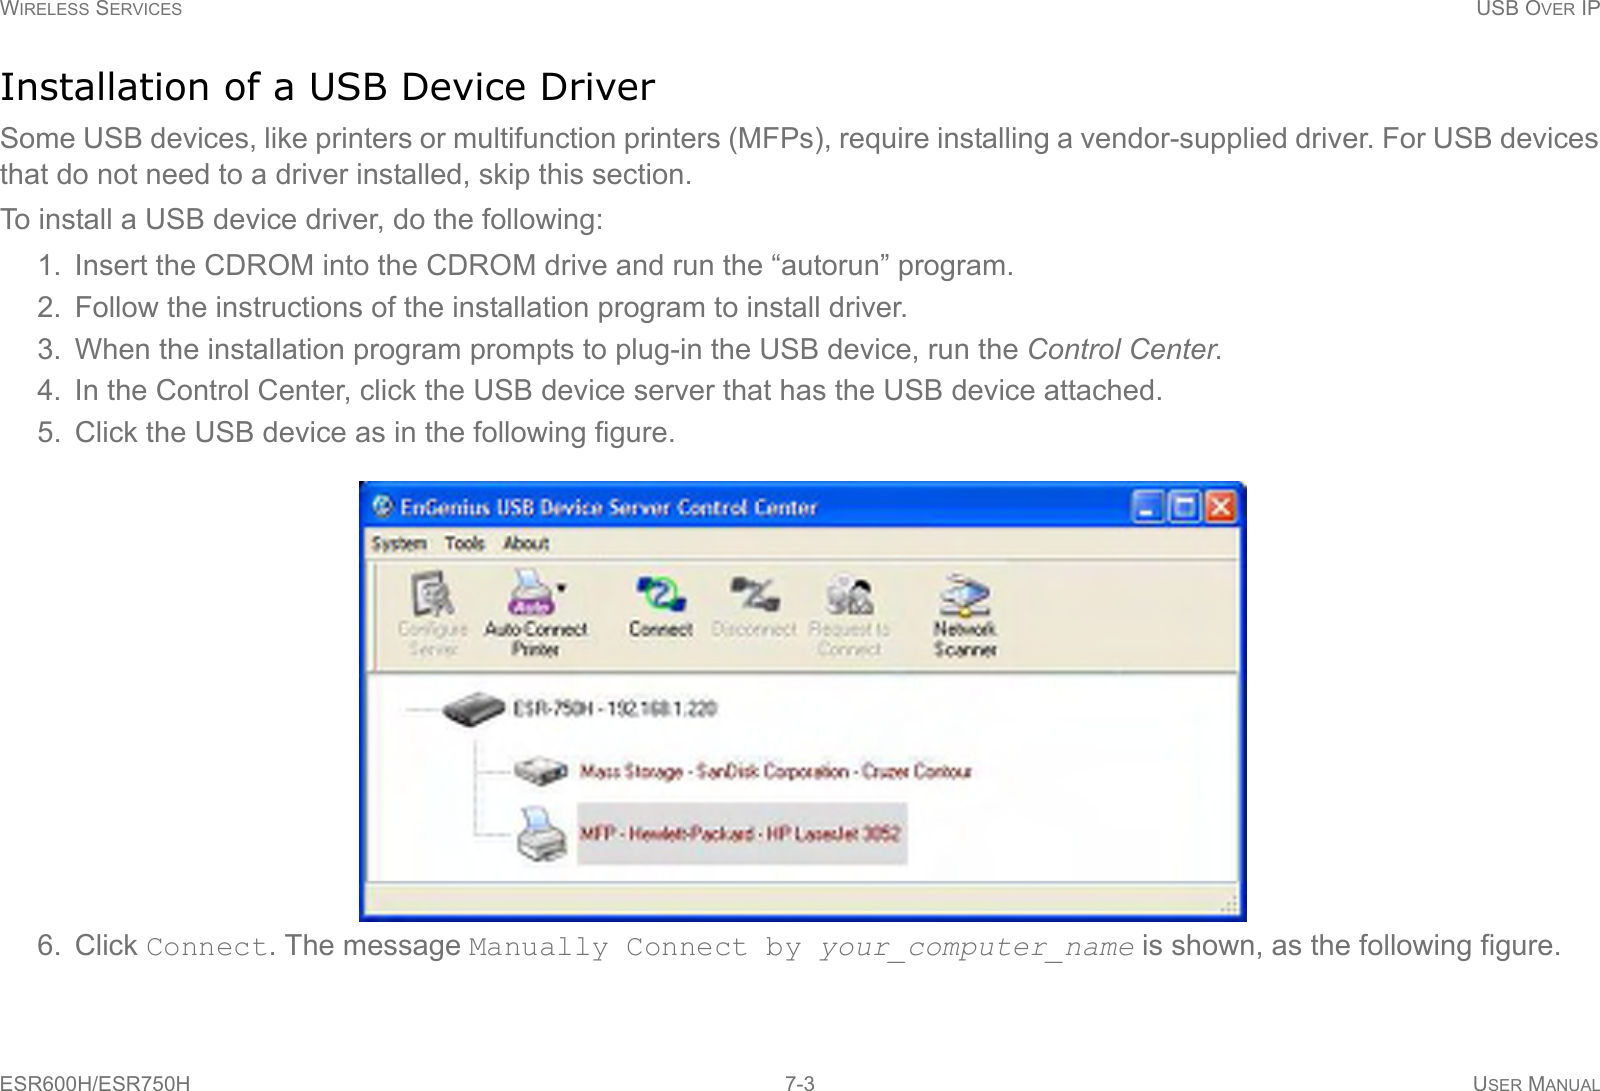 WIRELESS SERVICES USB OVER IPESR600H/ESR750H 7-3 USER MANUALInstallation of a USB Device DriverSome USB devices, like printers or multifunction printers (MFPs), require installing a vendor-supplied driver. For USB devices that do not need to a driver installed, skip this section.To install a USB device driver, do the following:1. Insert the CDROM into the CDROM drive and run the “autorun” program.2. Follow the instructions of the installation program to install driver.3. When the installation program prompts to plug-in the USB device, run the Control Center.4. In the Control Center, click the USB device server that has the USB device attached.5. Click the USB device as in the following figure.6. Click Connect. The message Manually Connect by your_computer_name is shown, as the following figure.